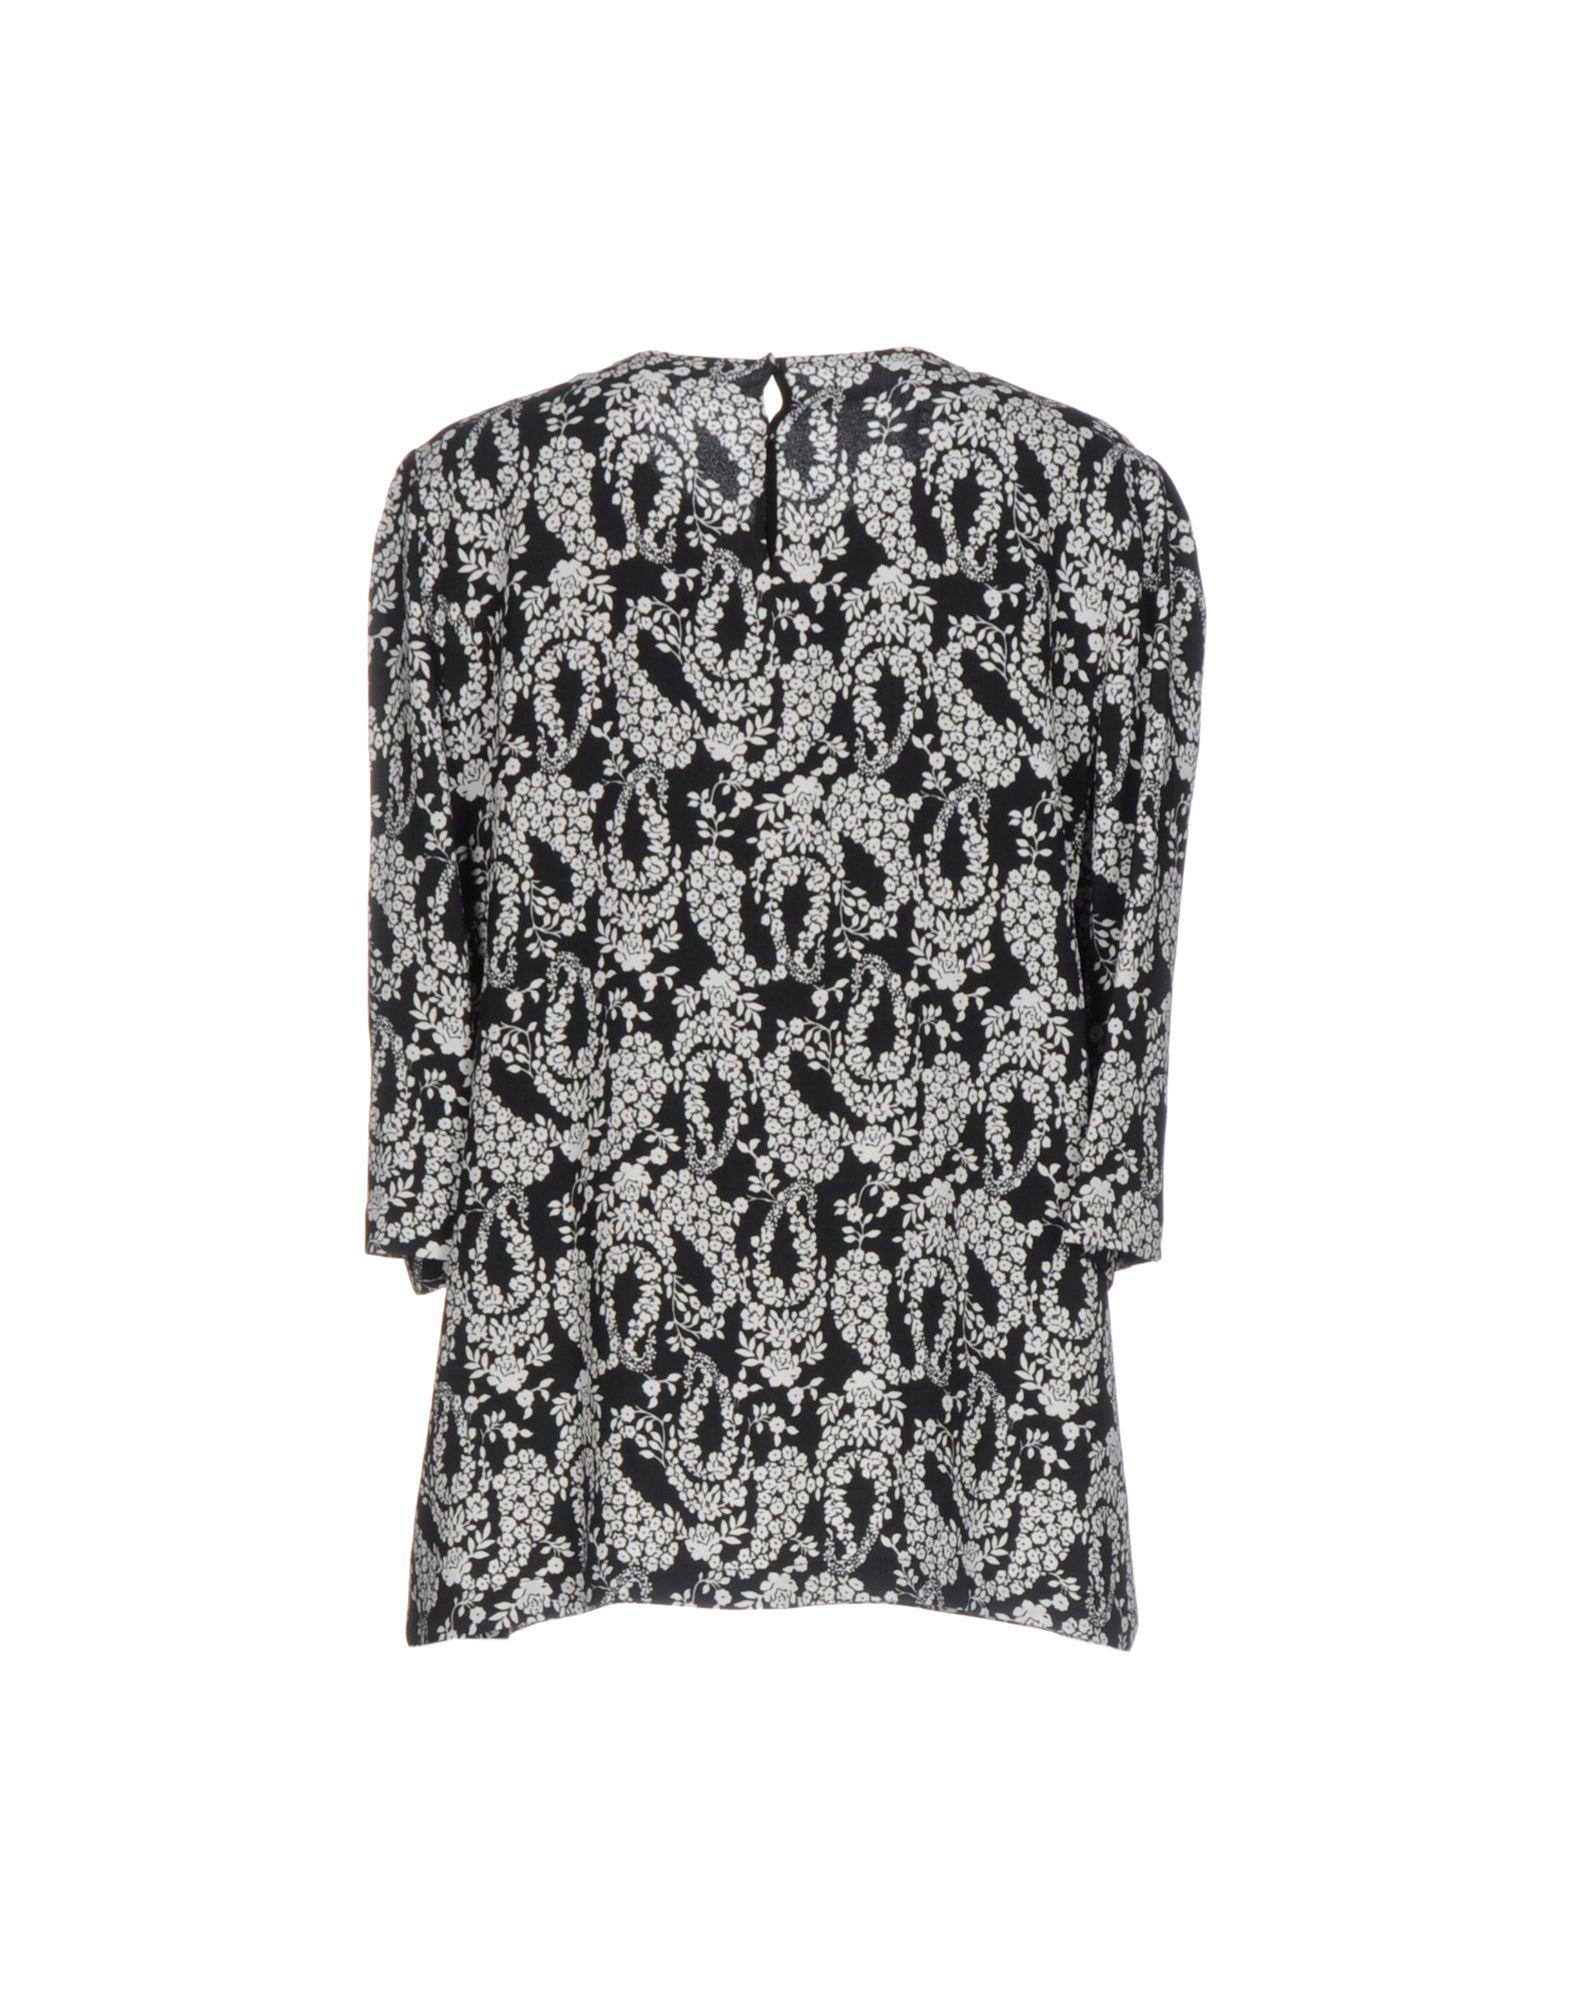 Dolce & Gabbana Synthetic Blouse in Black - Lyst